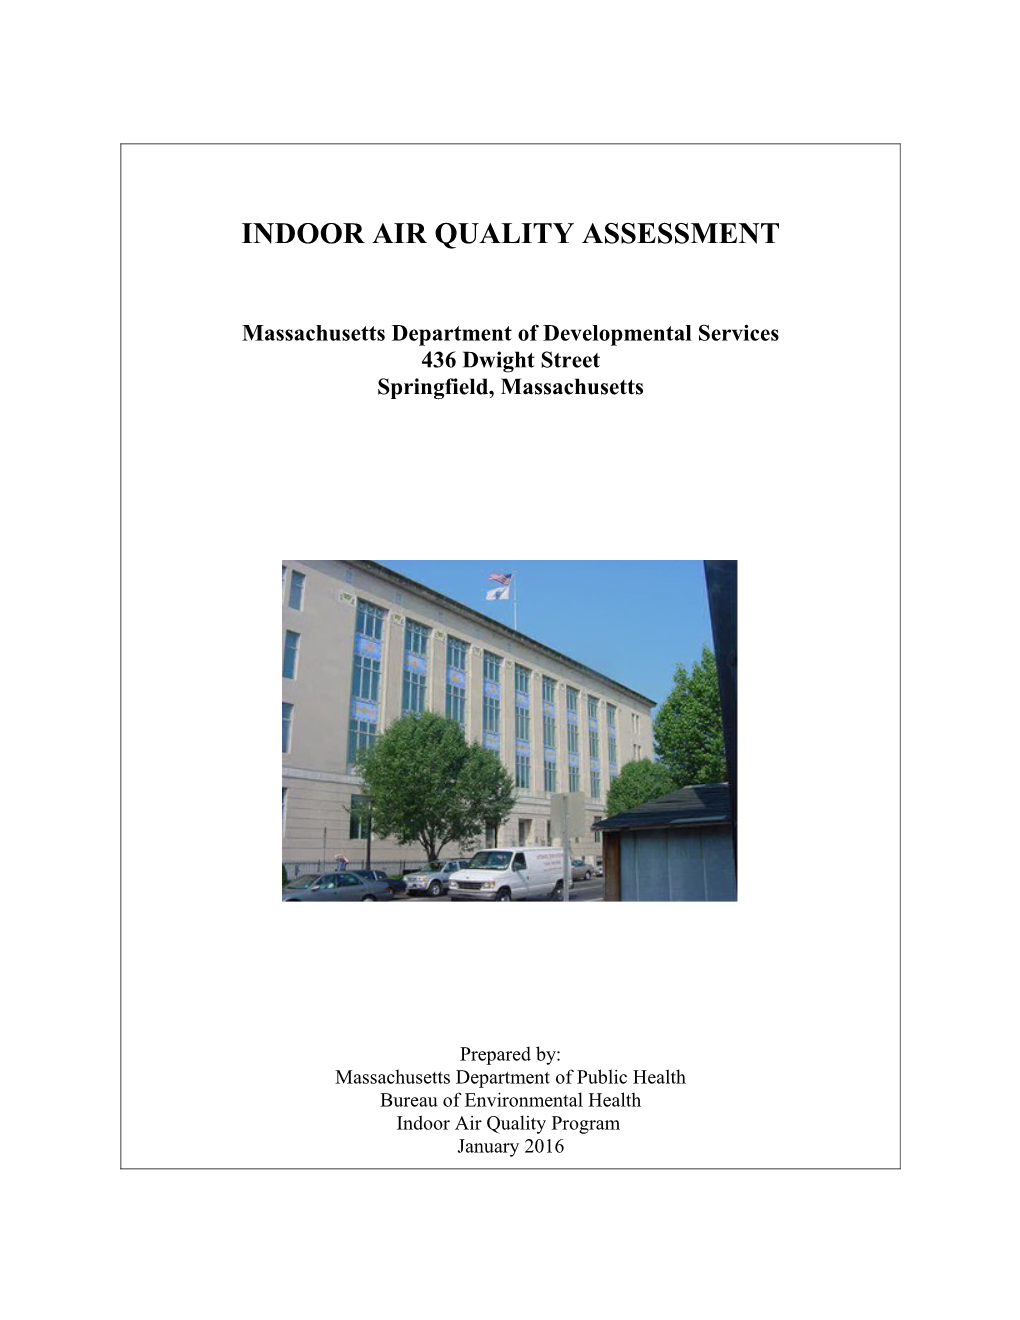 Indoor Air Quality Assessment s11